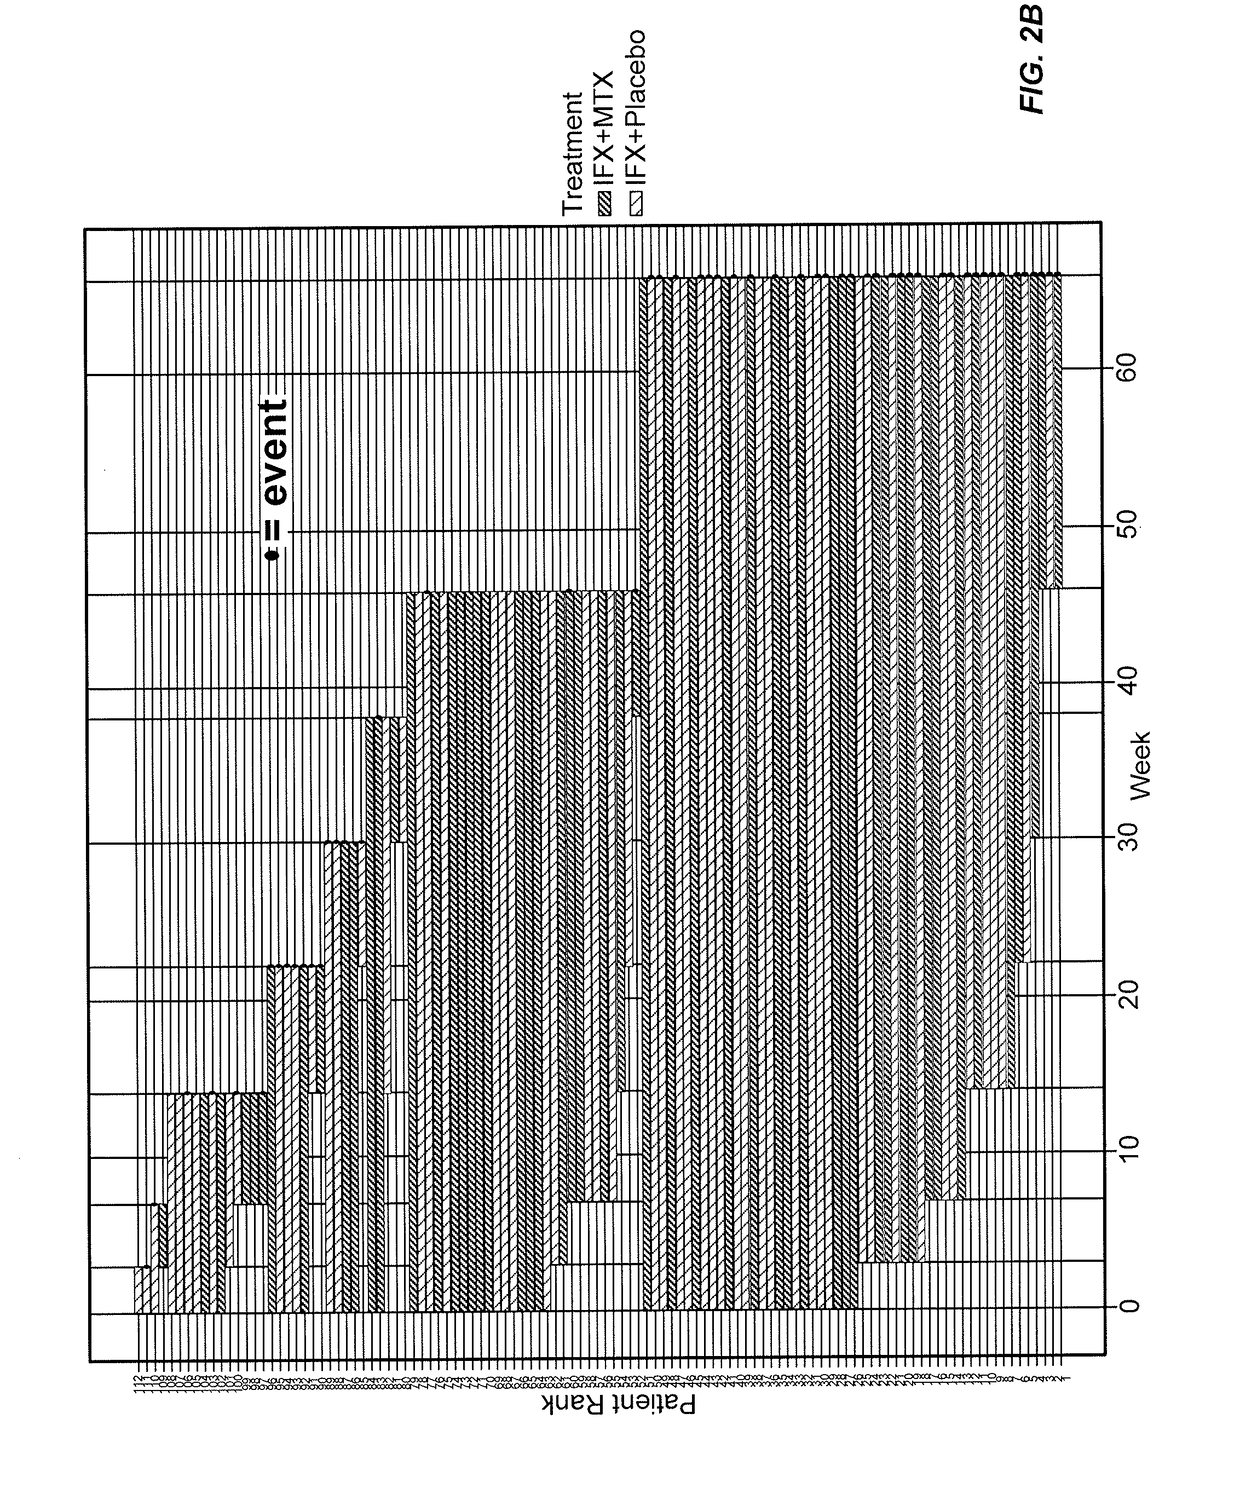 Methods of disease activity profiling for personalized therapy management